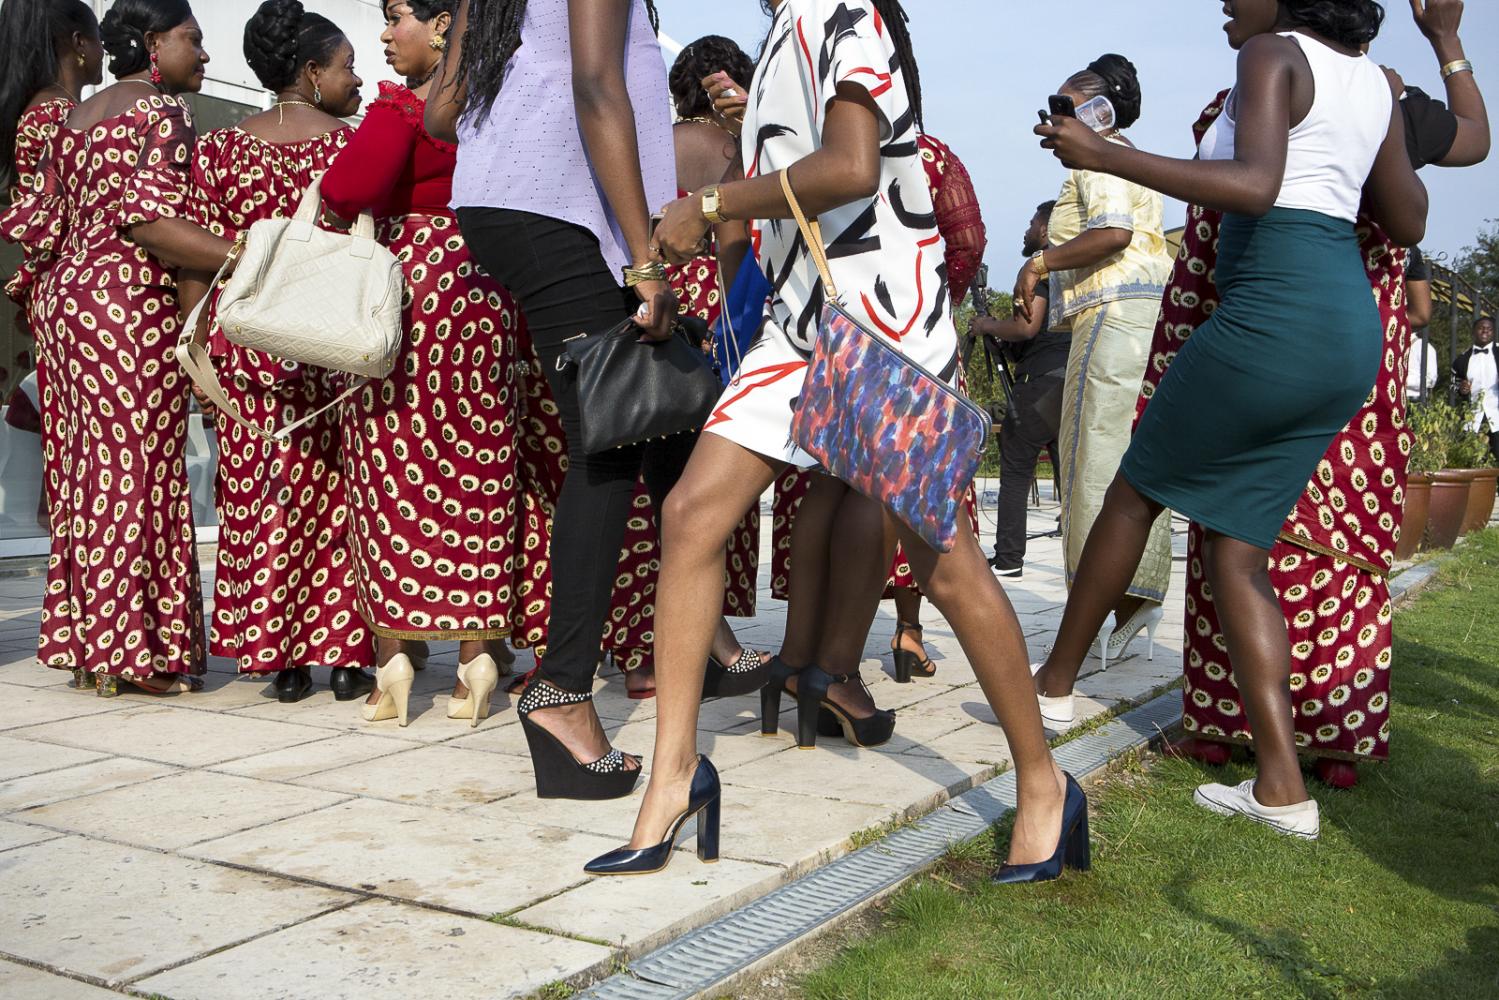  In a Congolese traditional wed...;eacute;e, Ile de France, 2014 